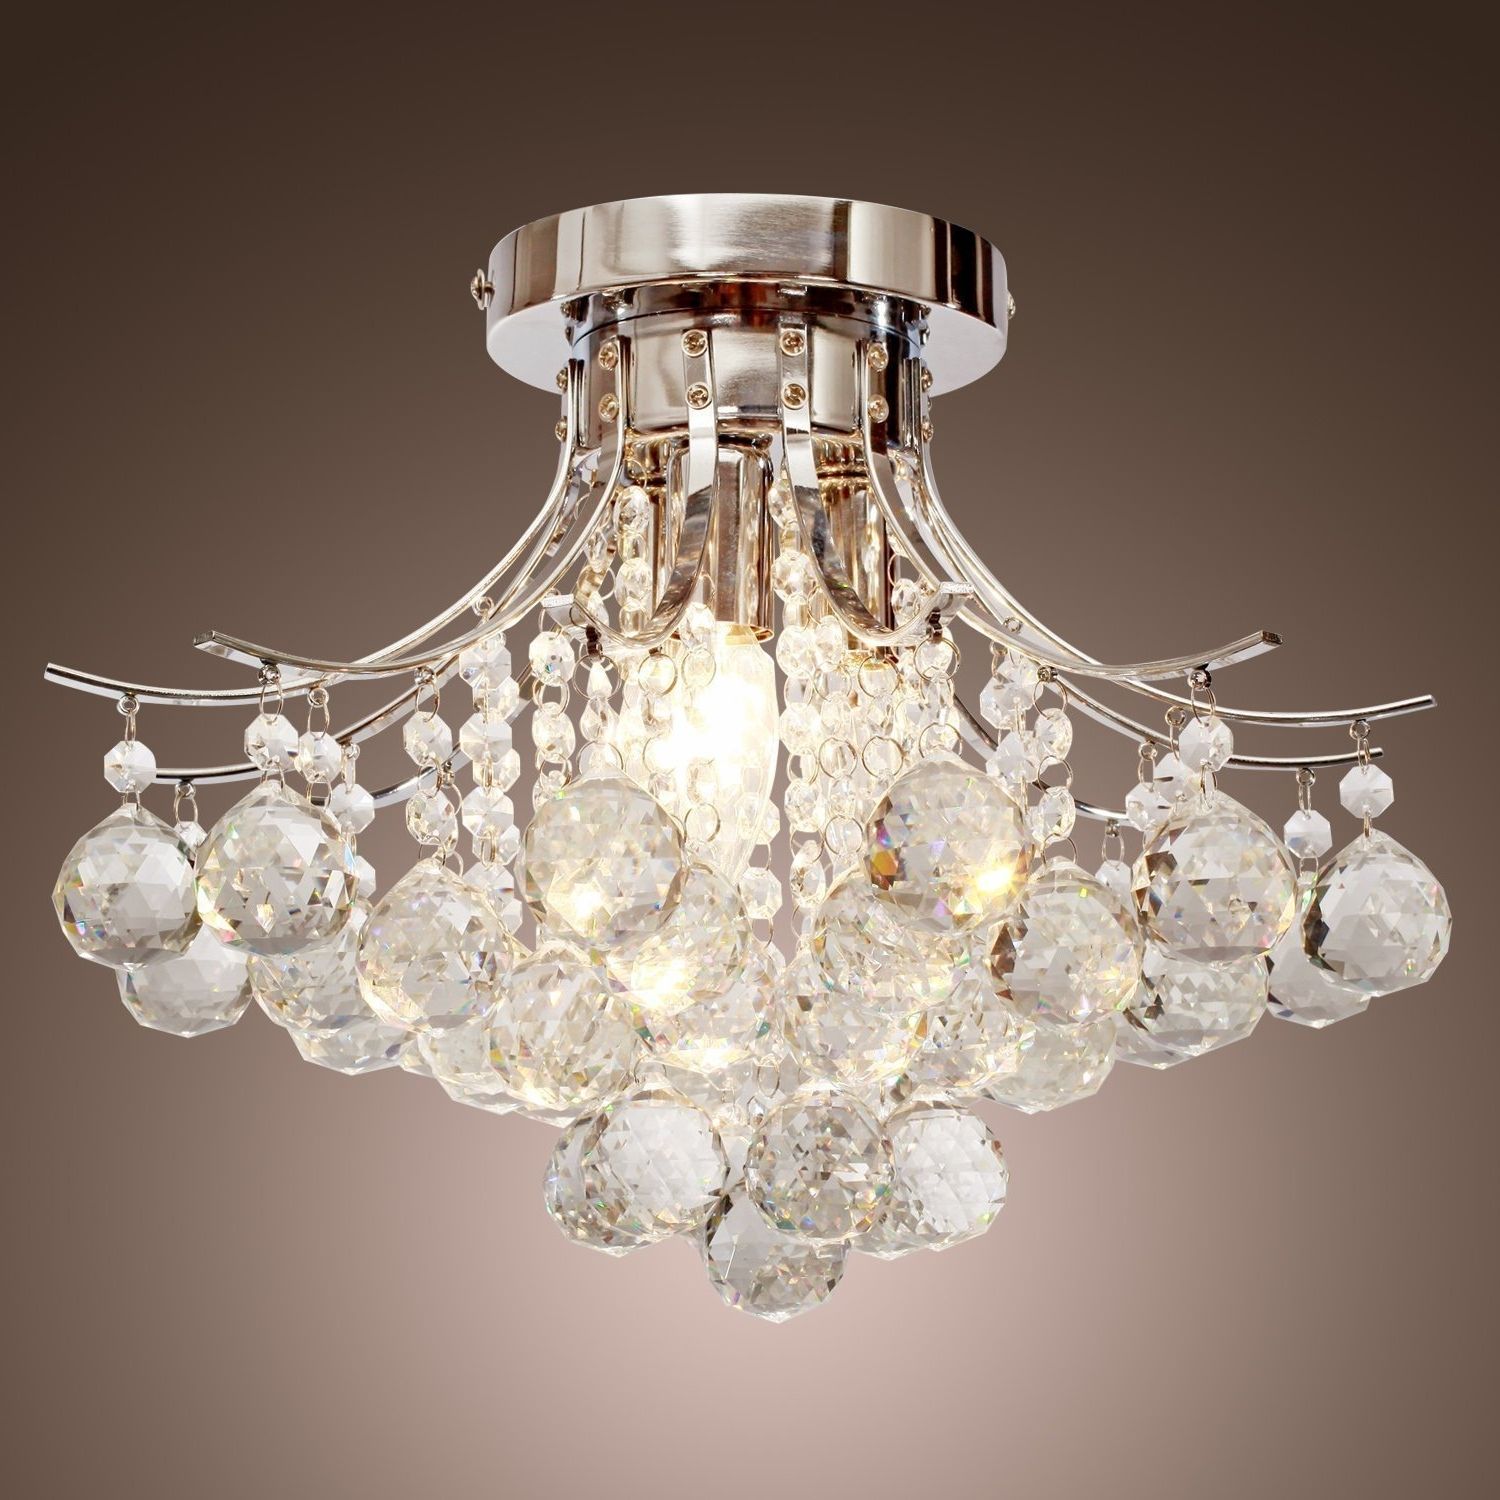 Locoâ Chrome Finish Crystal Chandelier With 3 Lights, Mini Style With Regard To Best And Newest 3 Light Crystal Chandeliers (View 8 of 15)